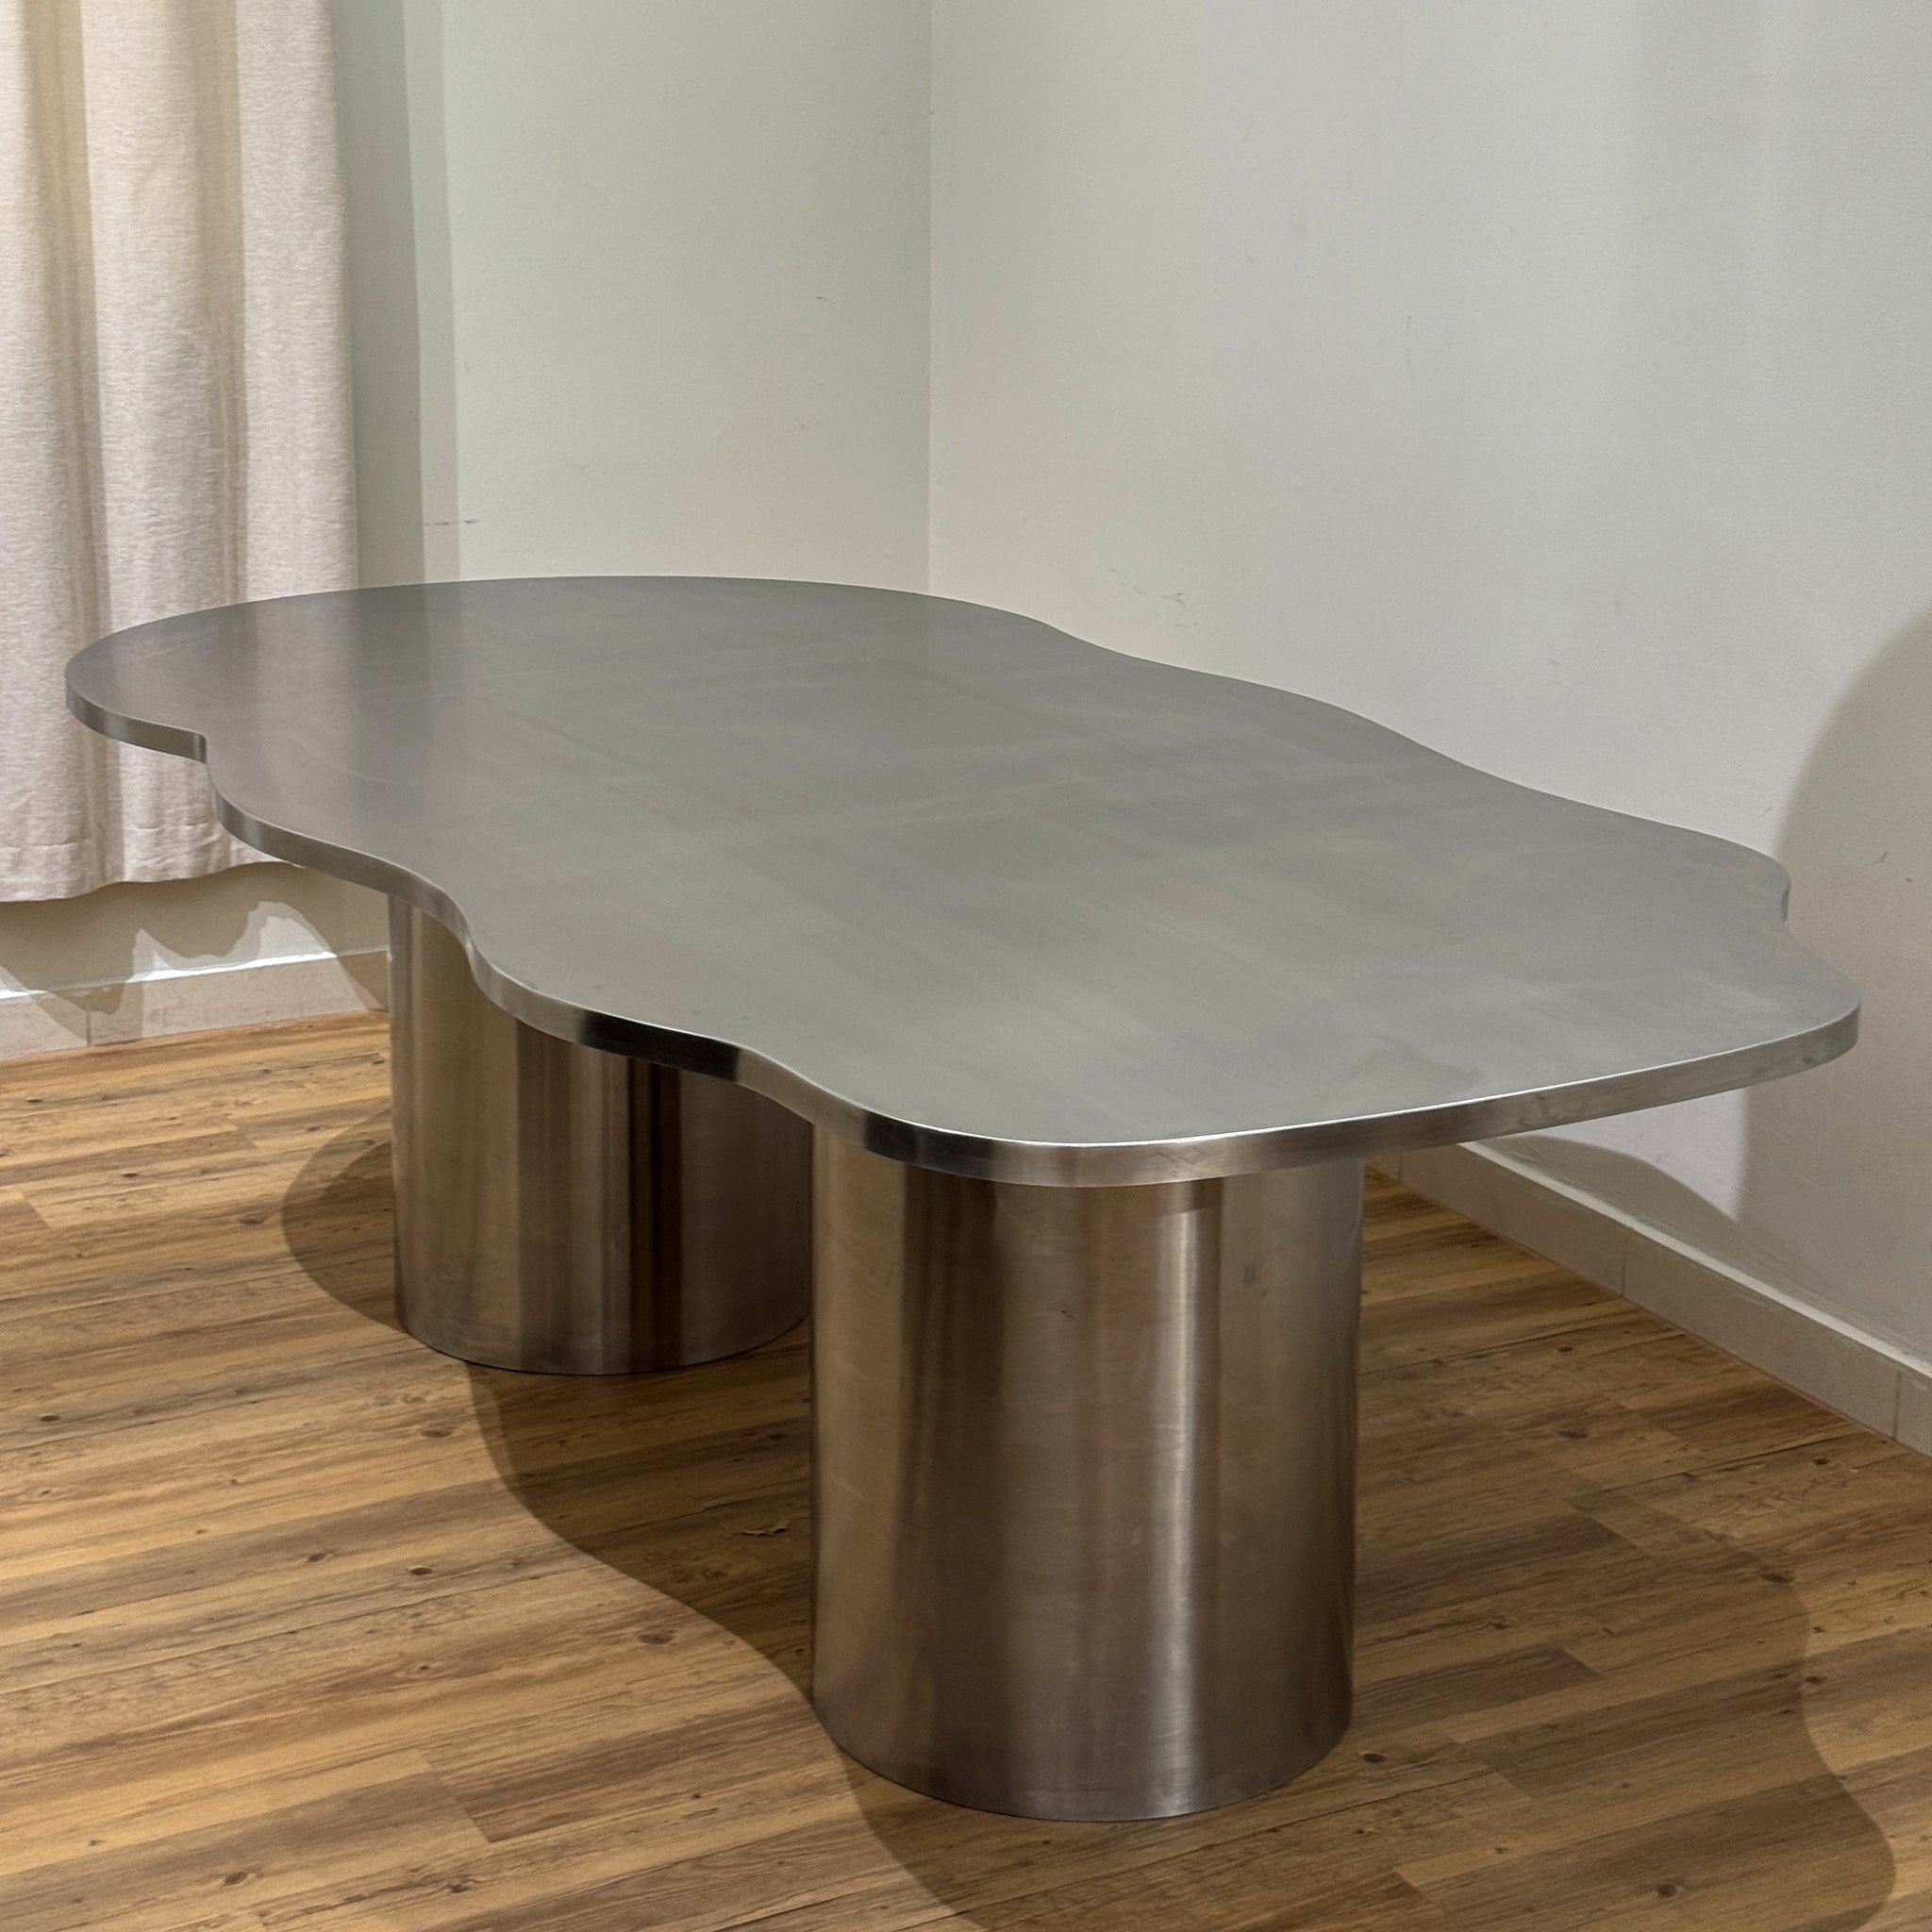 The Victoria Curvy Dining Table in Stainless Steel